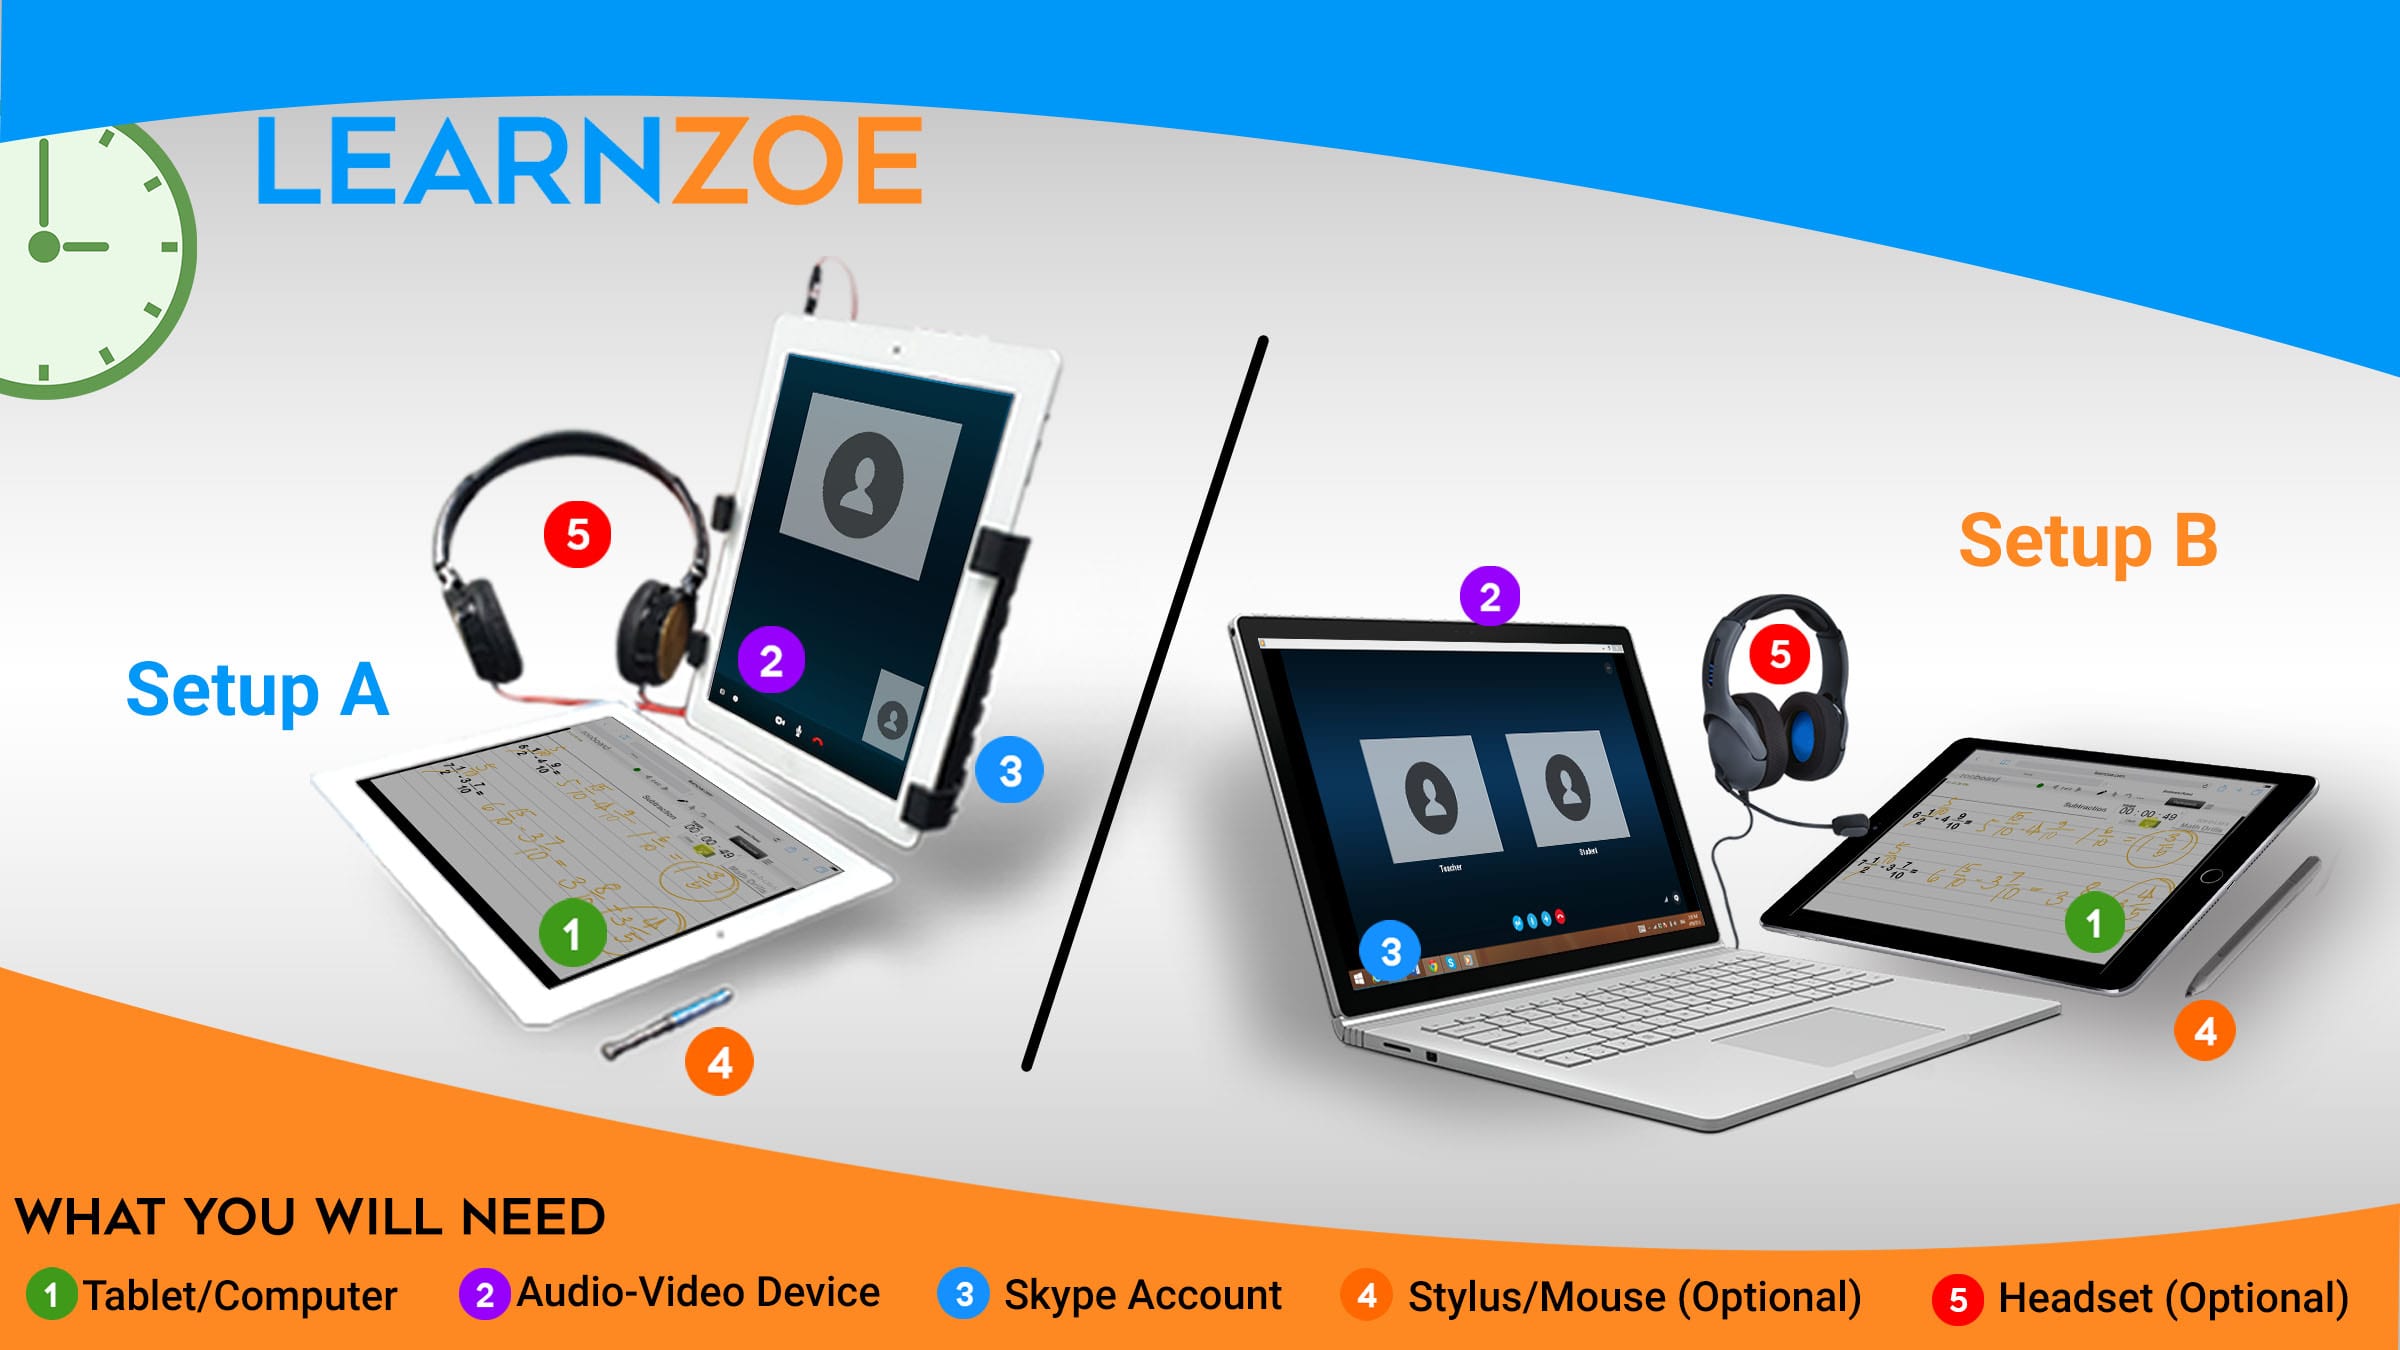 Devices needed for Learn Zoe session. Option A: 2 tables, headset, stylus and skype account. Option B: Laptop, tablet, headset, stylus and skype account